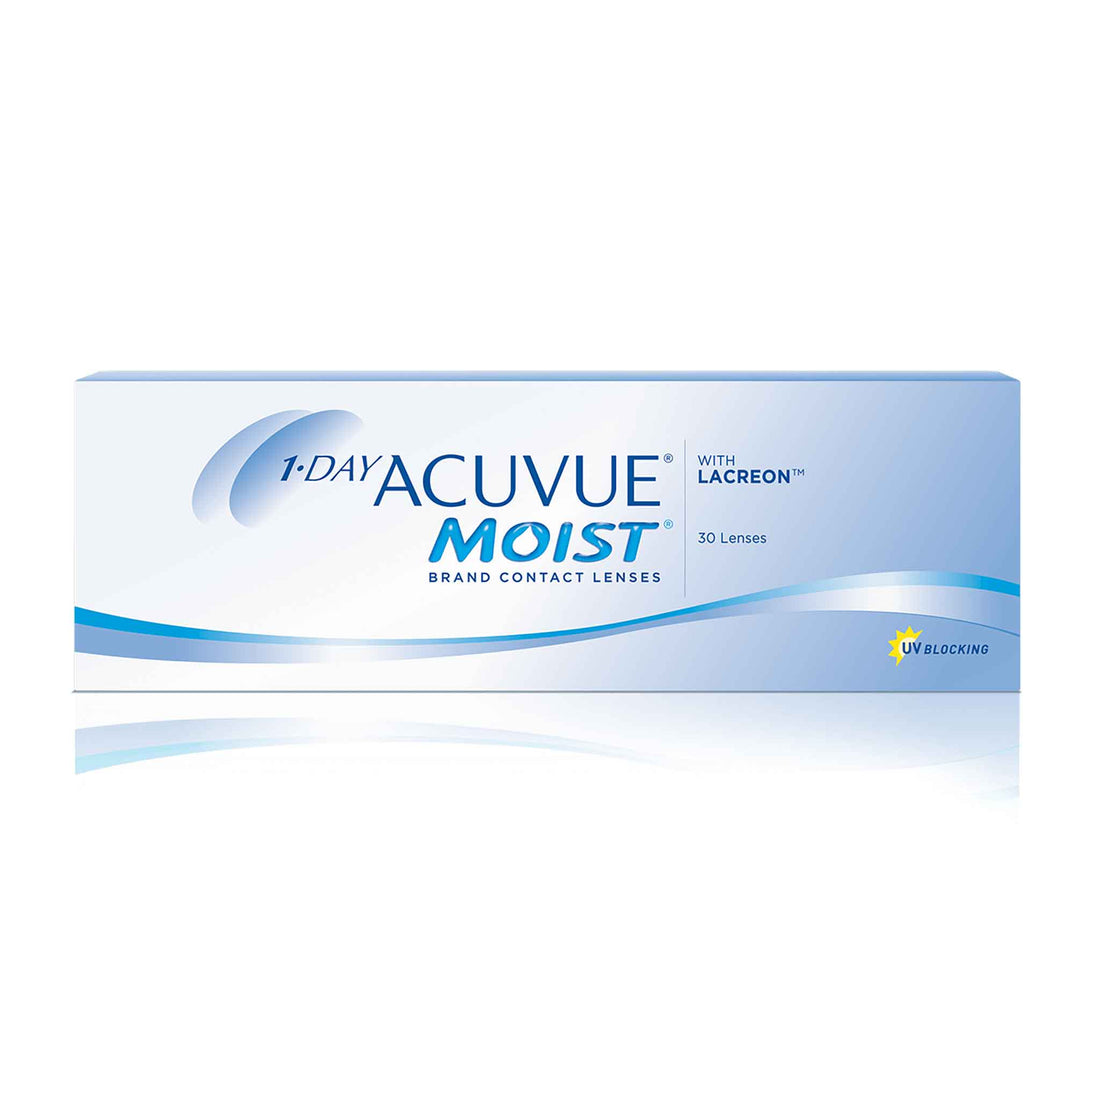 Acuvue 1 Day Moist with LACREON Technology - 30 Pack - Nation's Vision